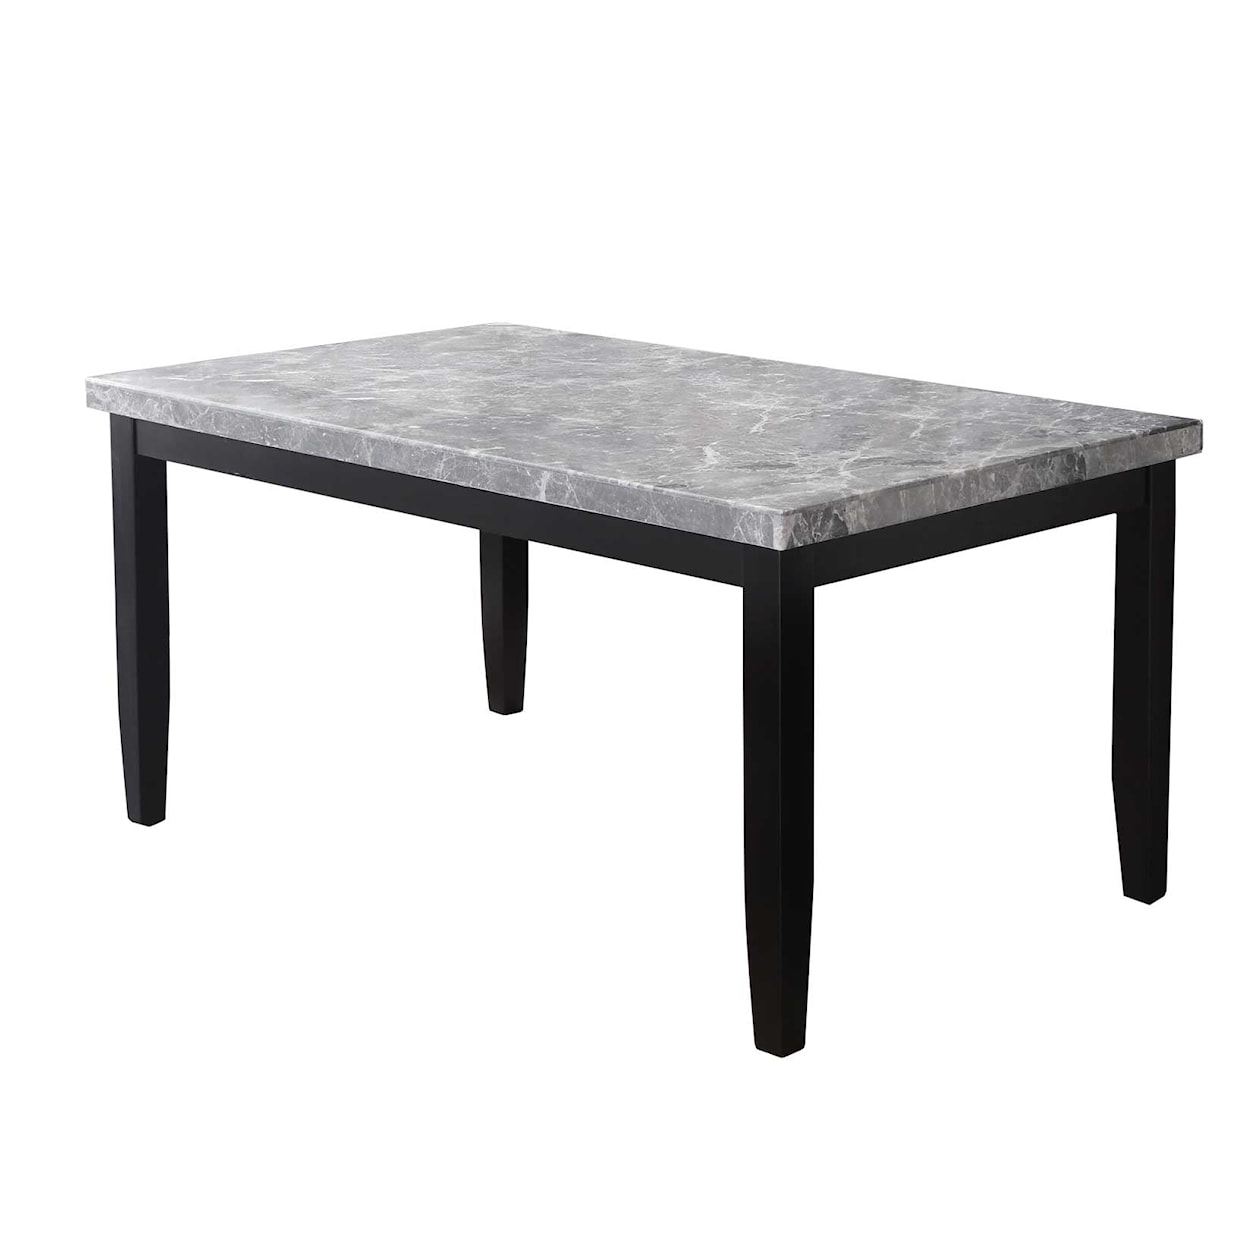 Steve Silver Napoli Marble Top Dining Table